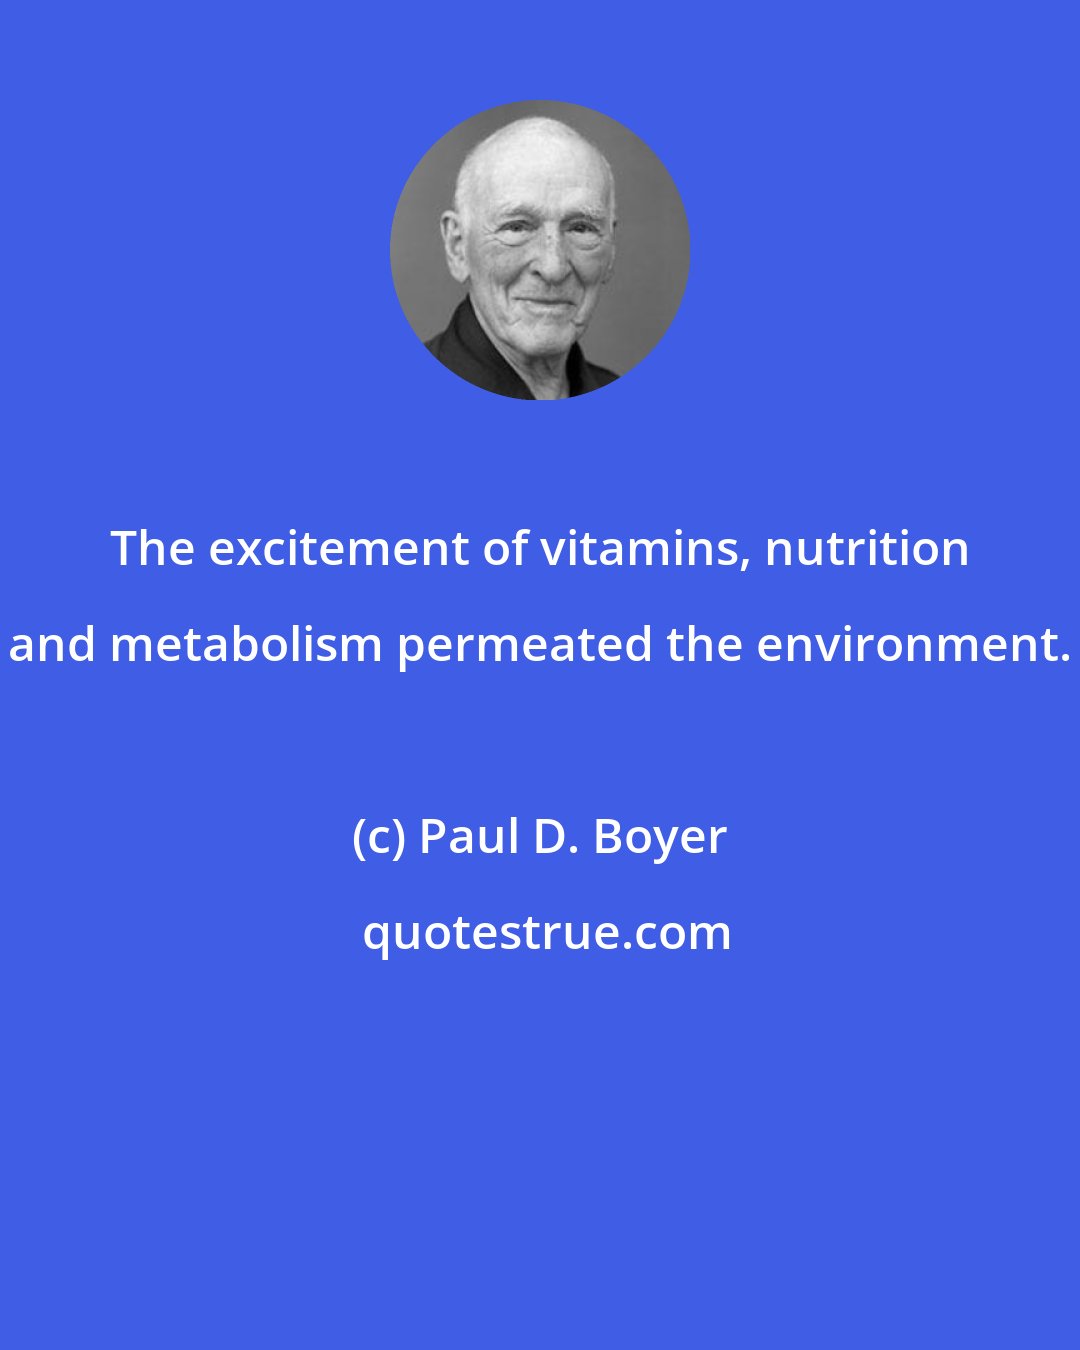 Paul D. Boyer: The excitement of vitamins, nutrition and metabolism permeated the environment.